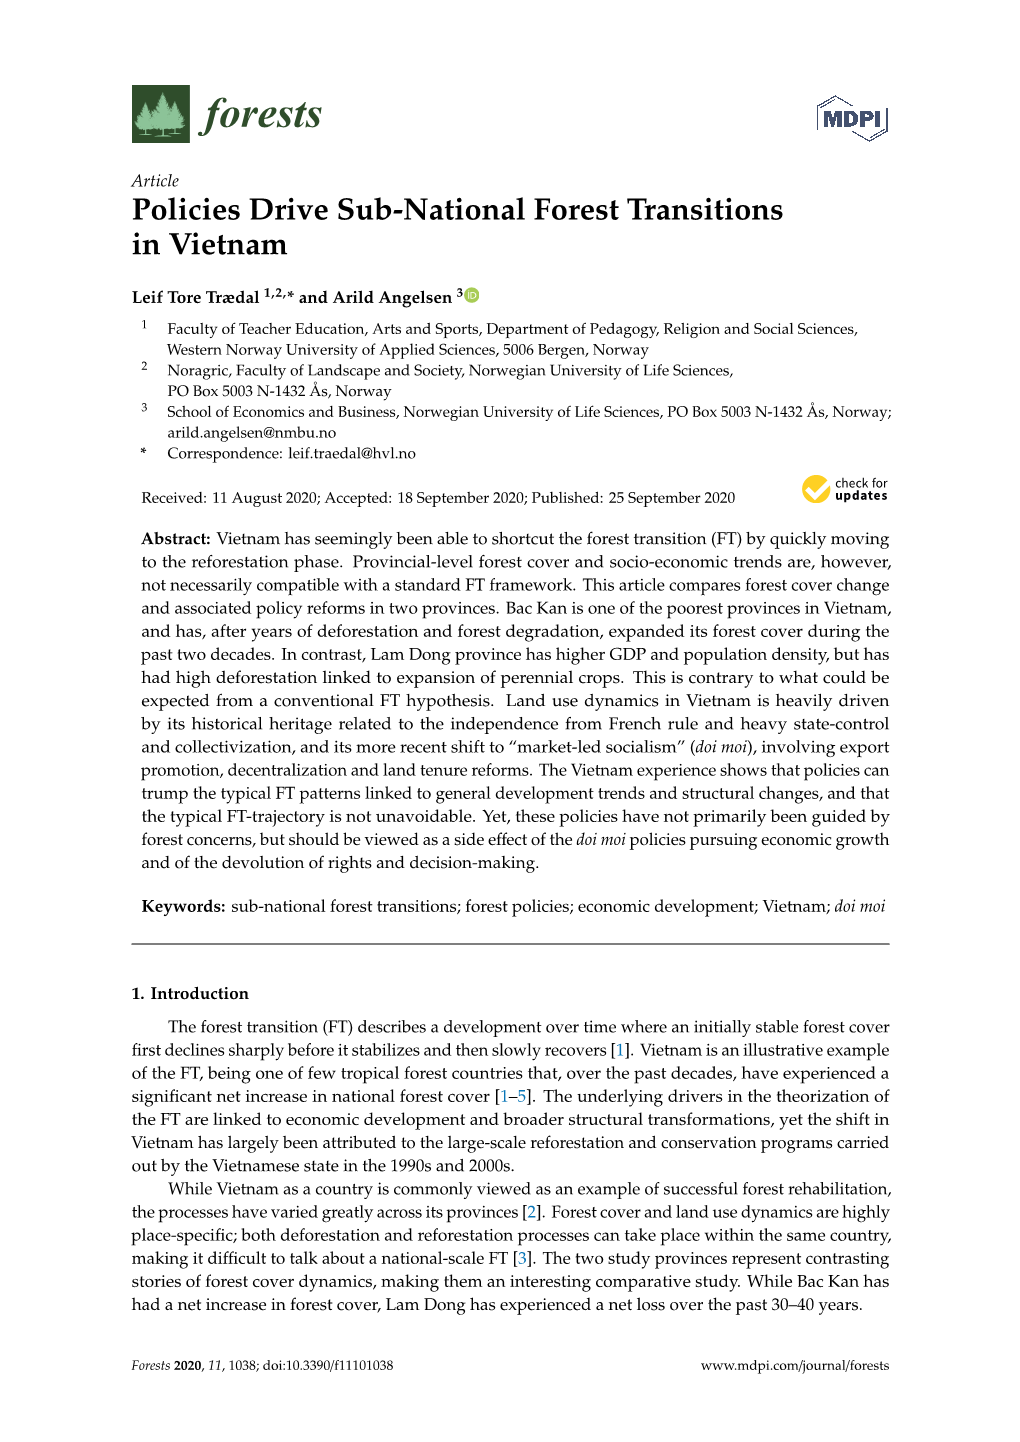 Policies Drive Sub-National Forest Transitions in Vietnam